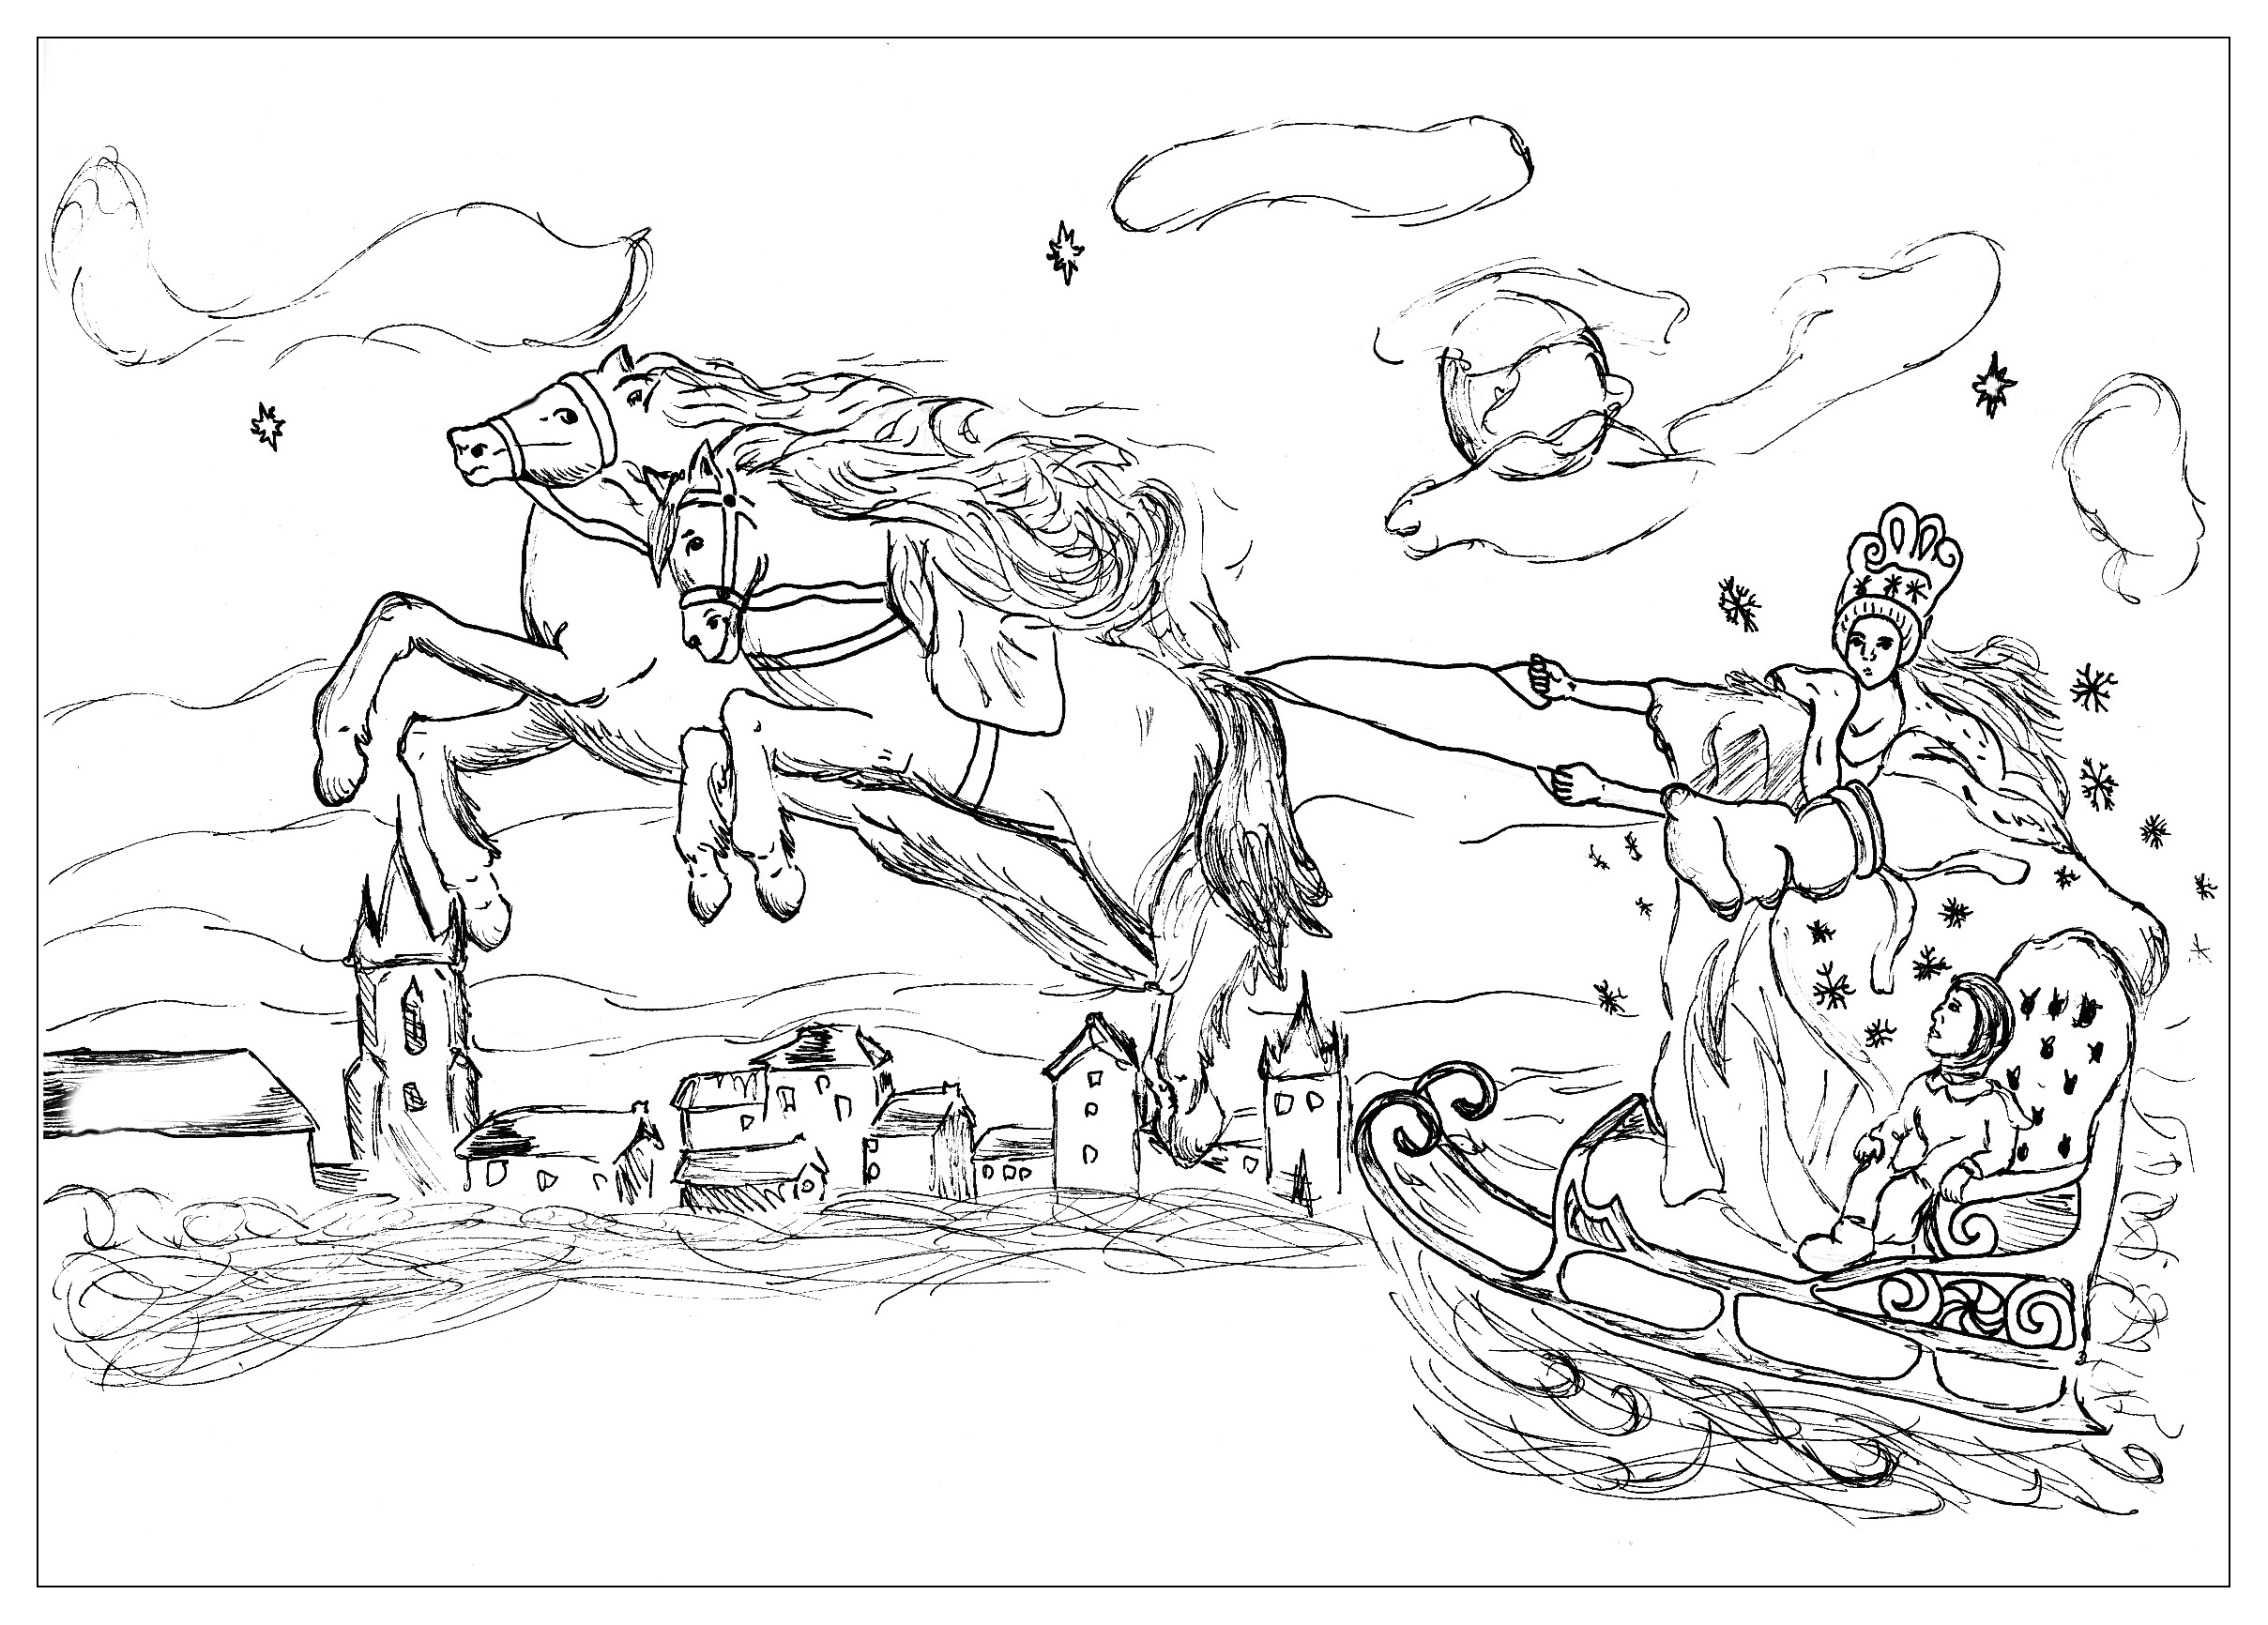 Here is a coloring page on the original tale of Andersen 'Frozen', Artist : Allan